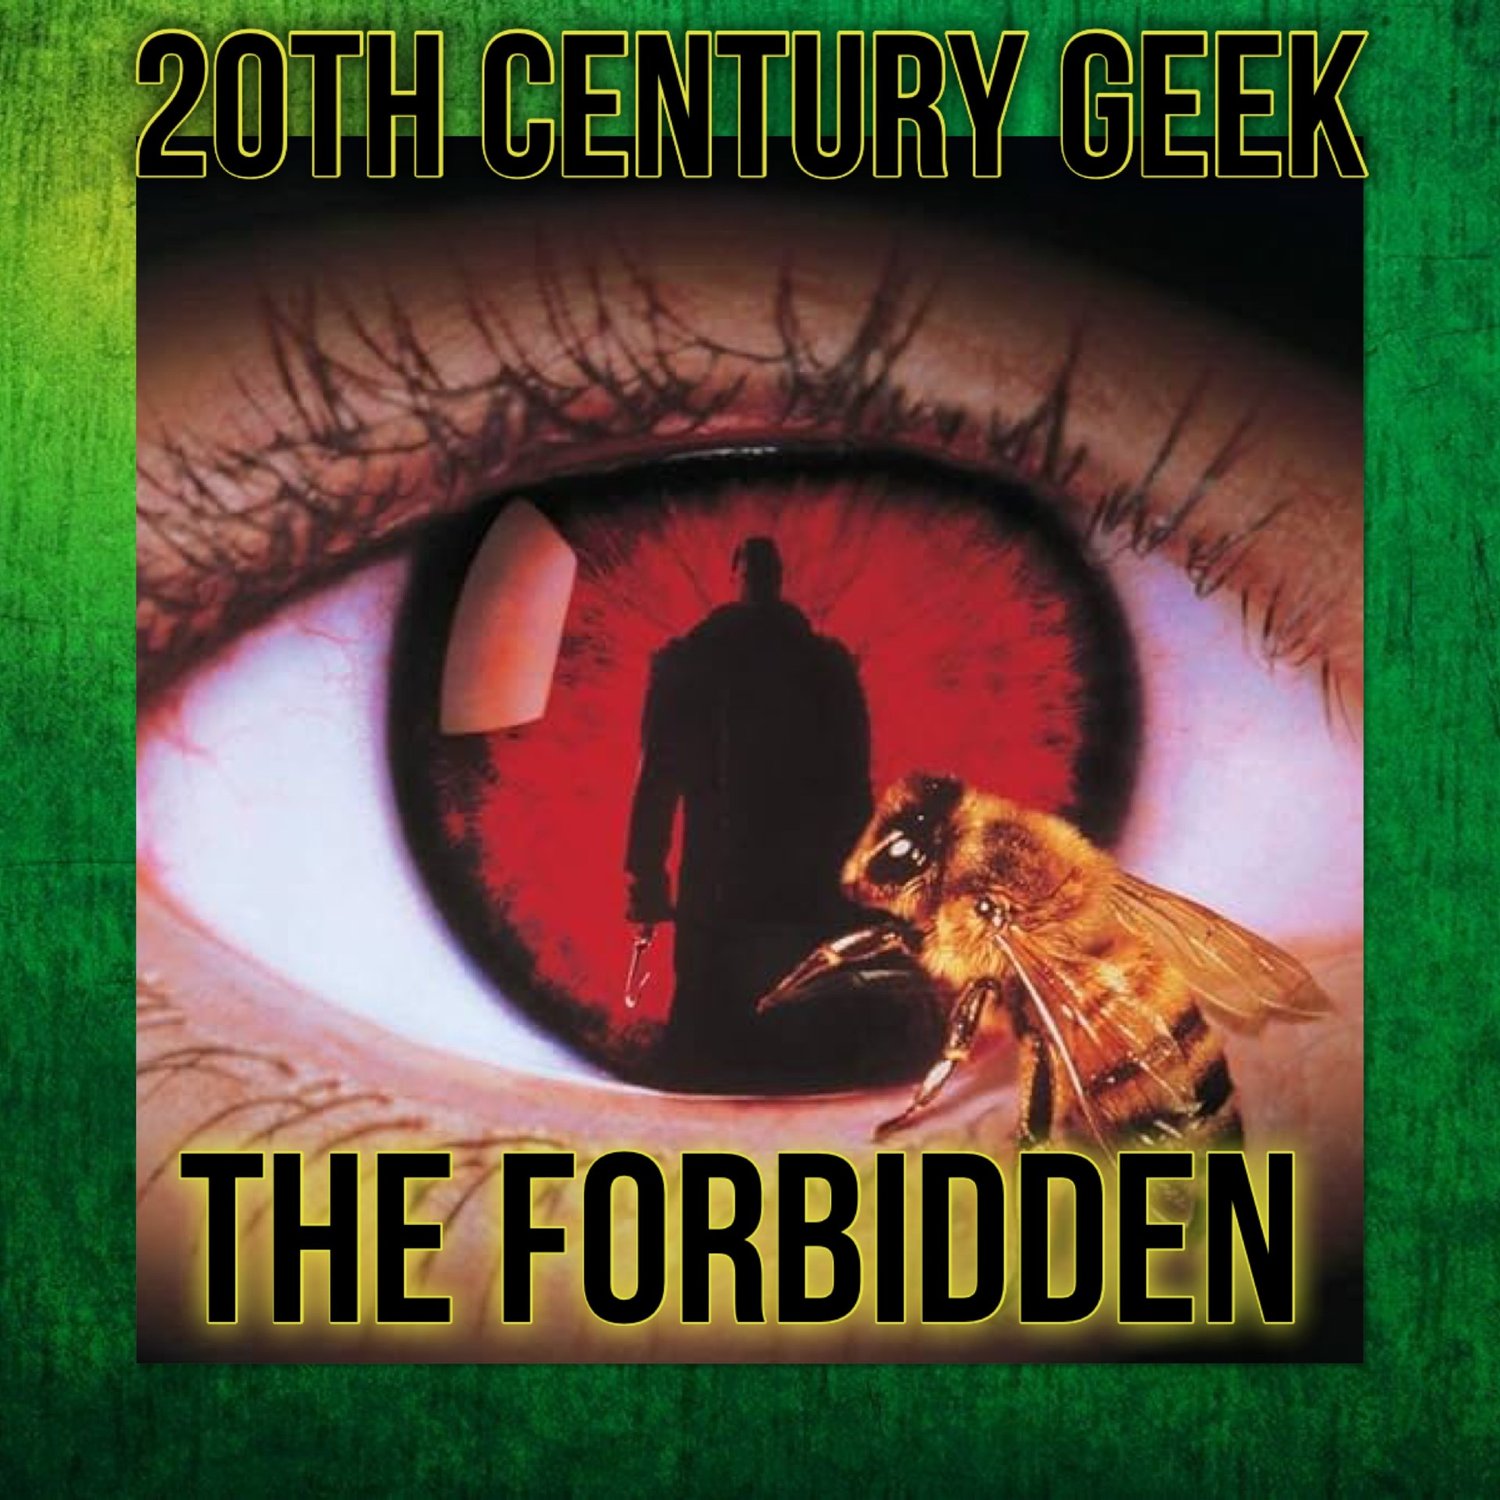 Episode 185 Story Time The Forbidden & Candyman